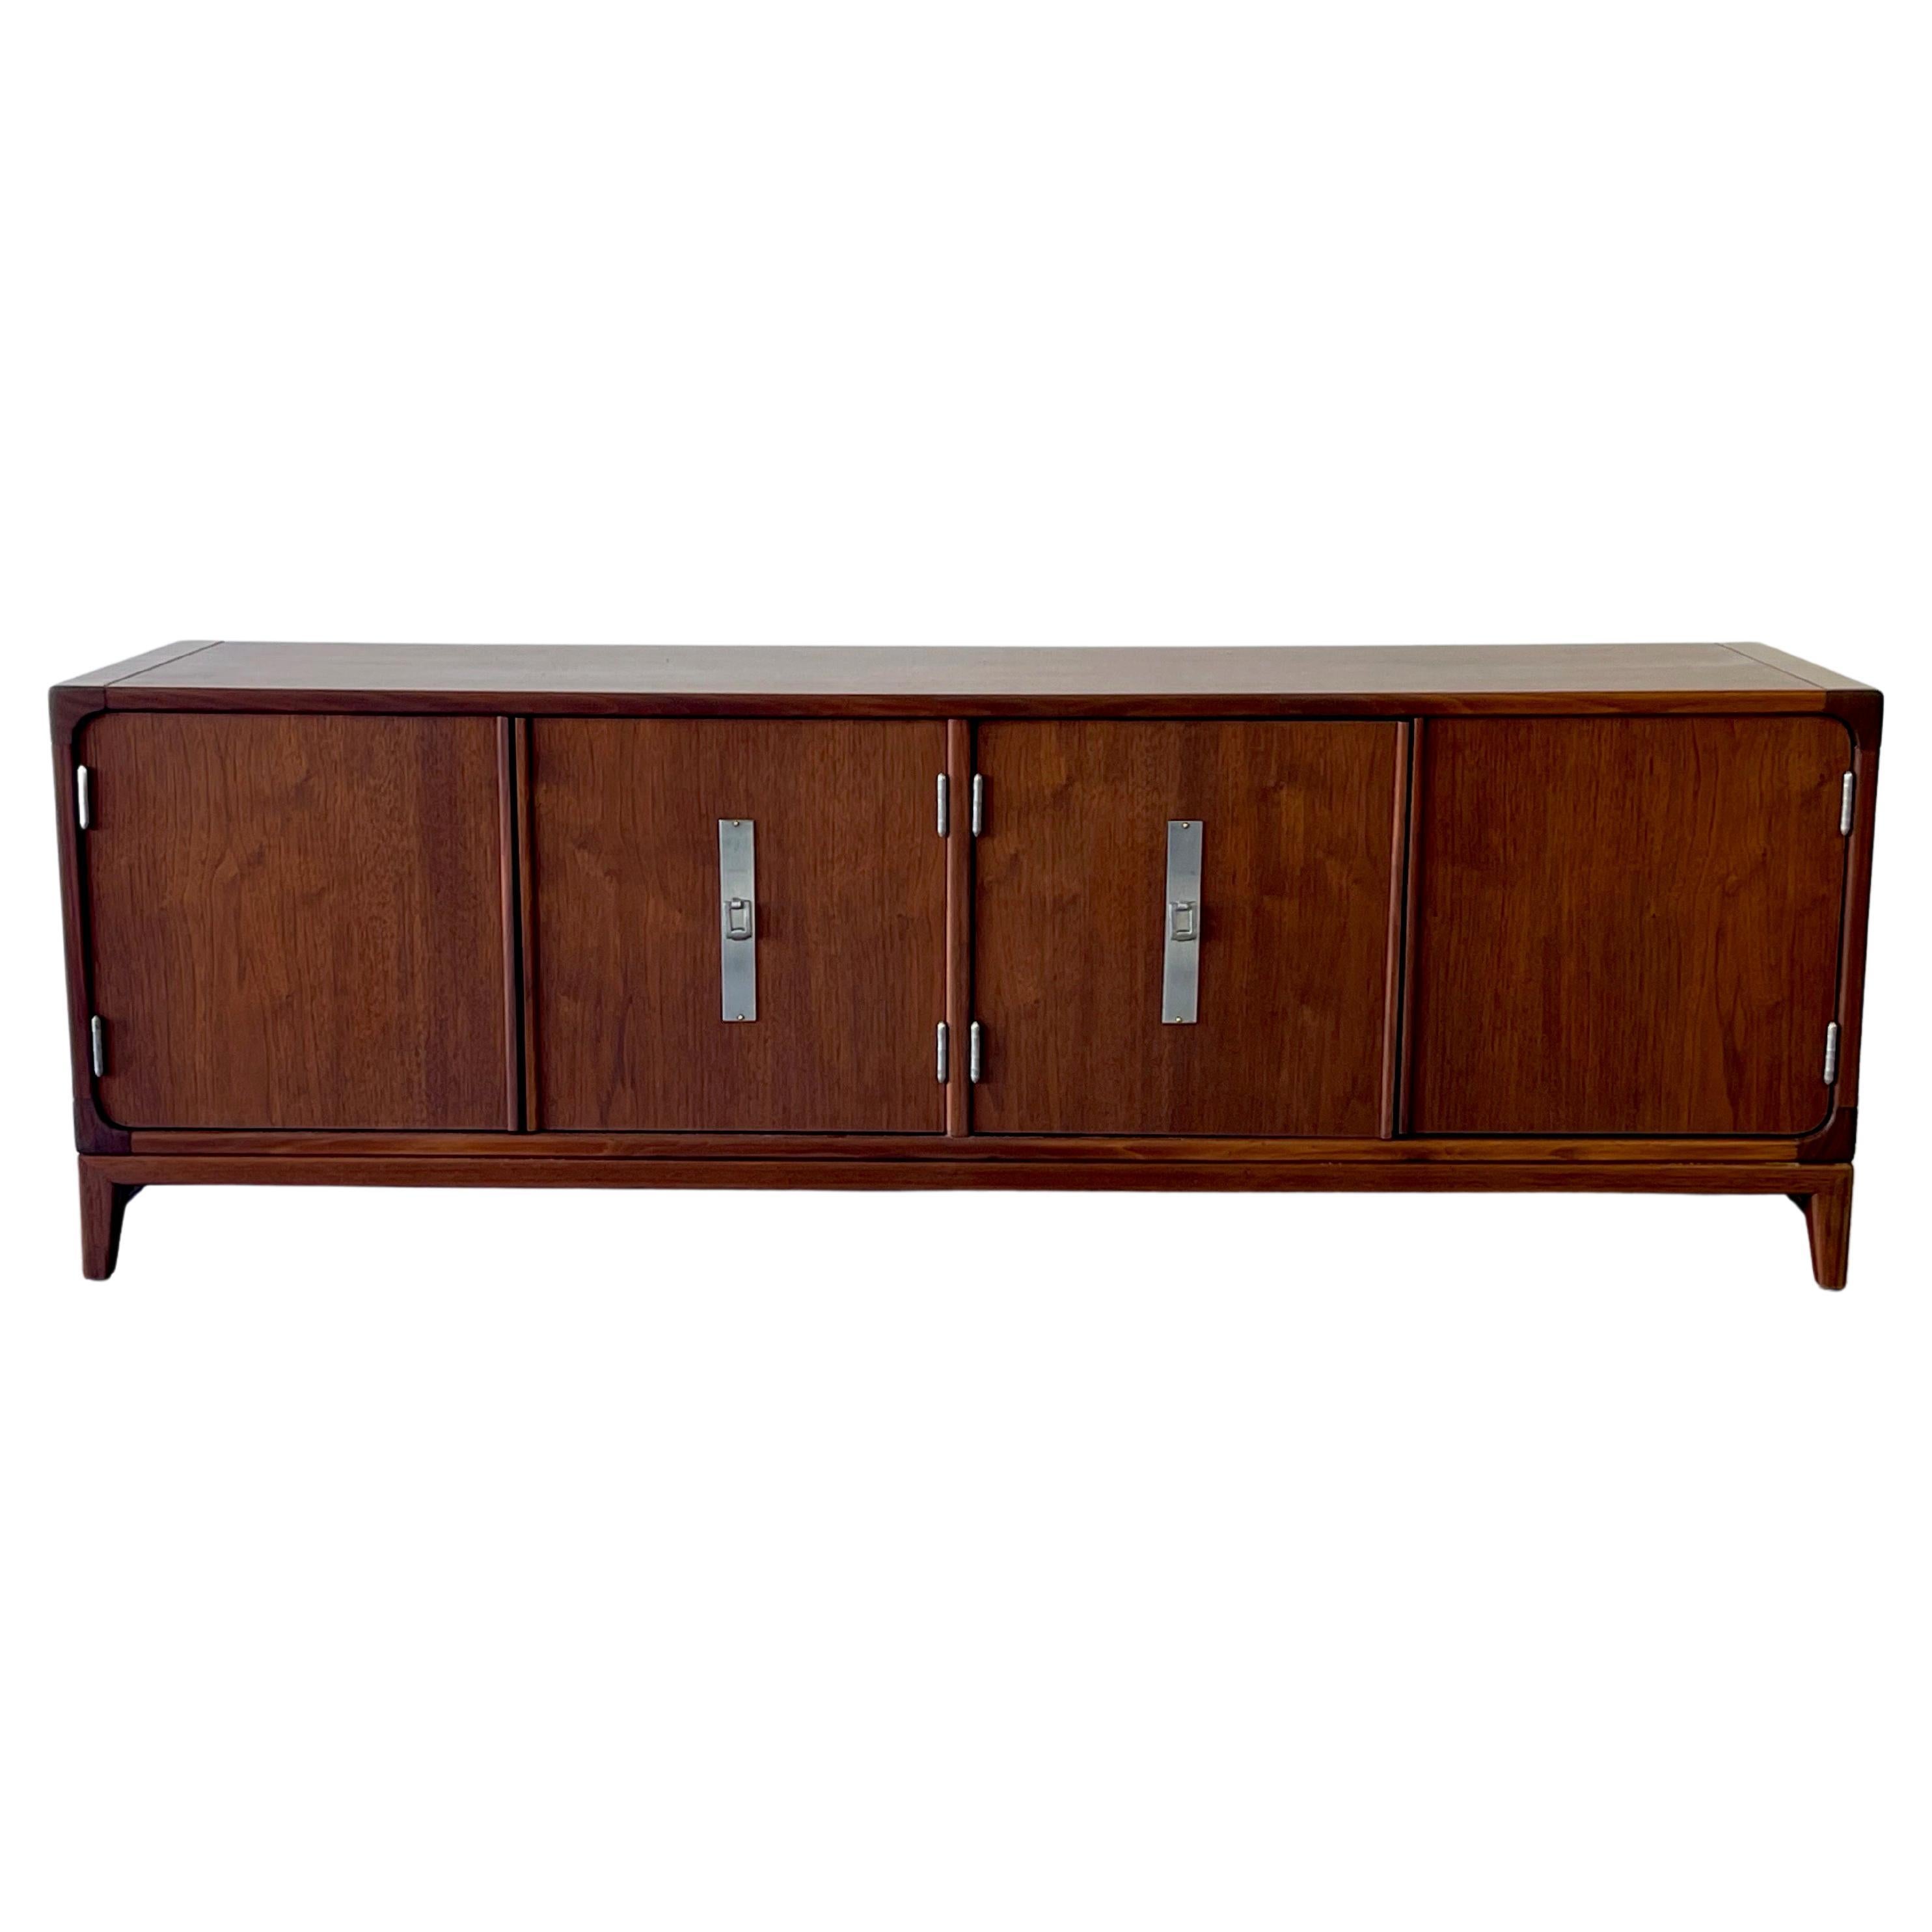 John Keal Brown-Saltman Mid-Century Modern Low Credenza, Record, Stereo Cabinet